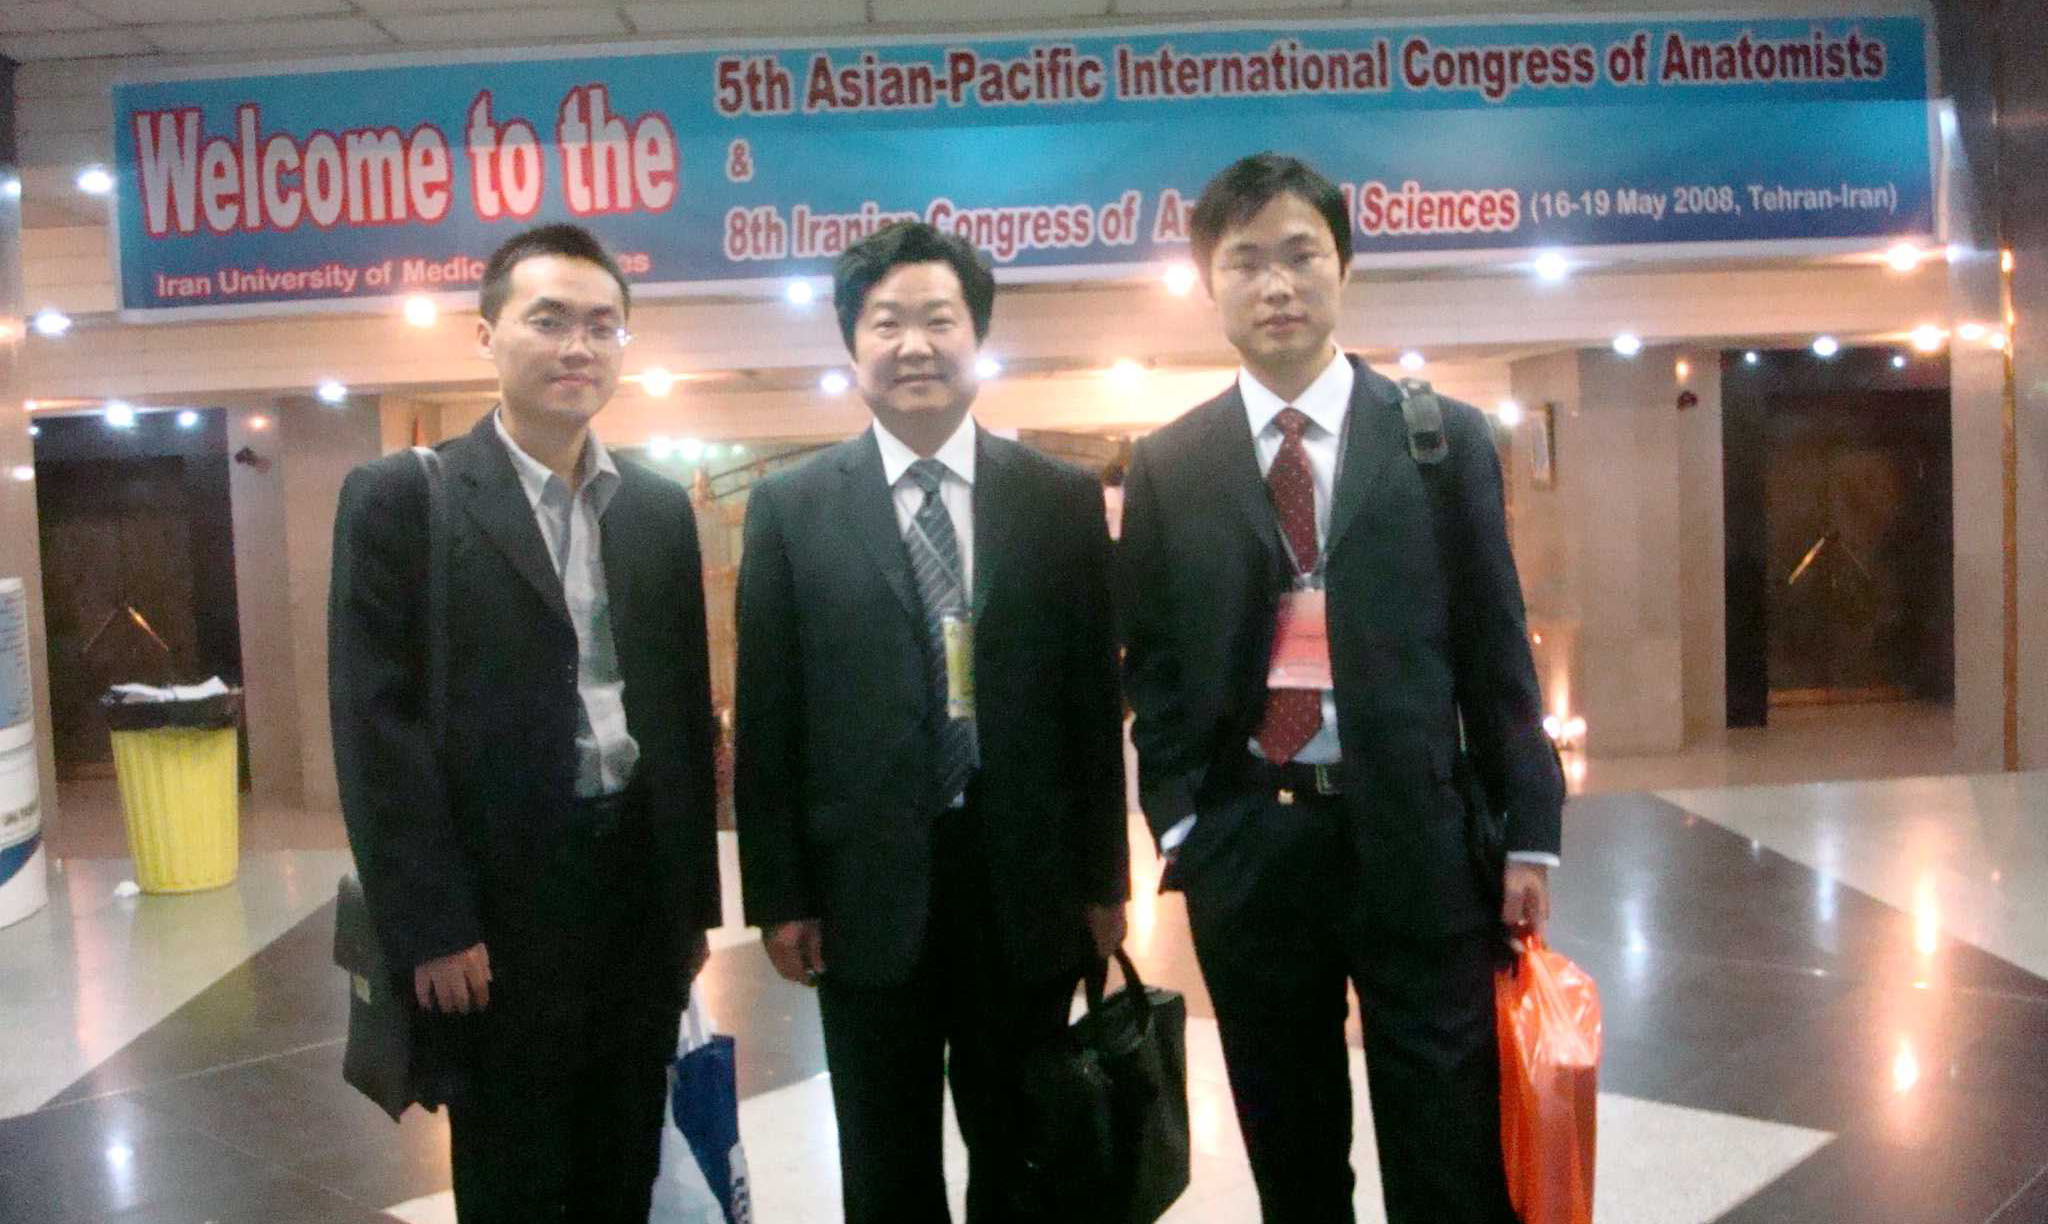 The 5th Asian--Pacific International Congress of Anatomists